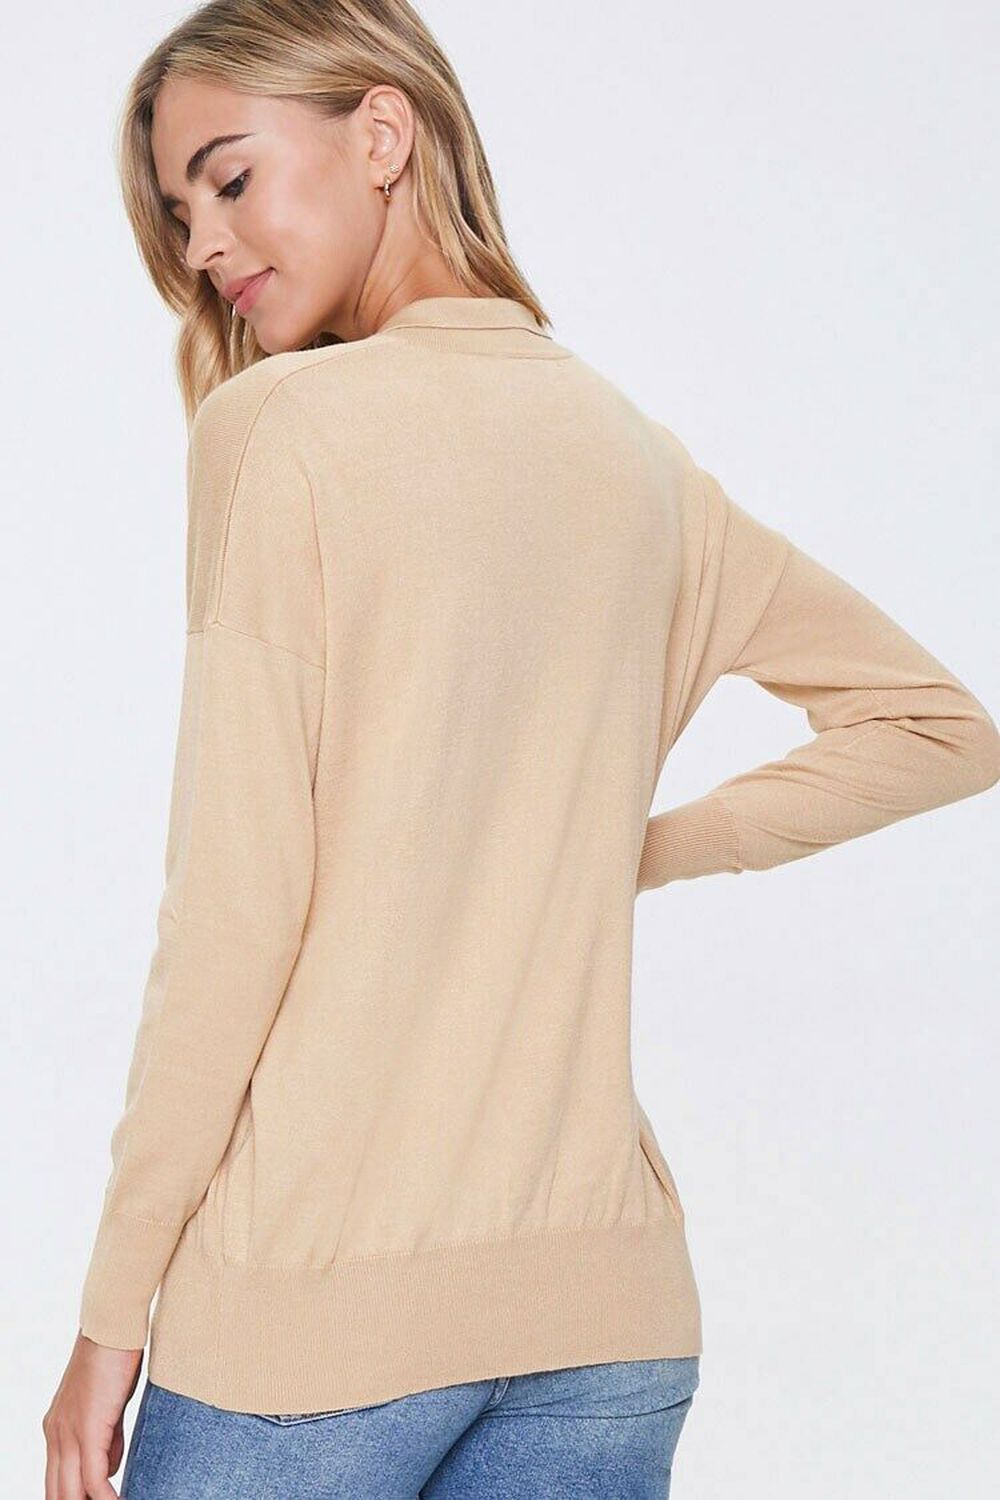 TAUPE Ribbed Collared Top, image 3